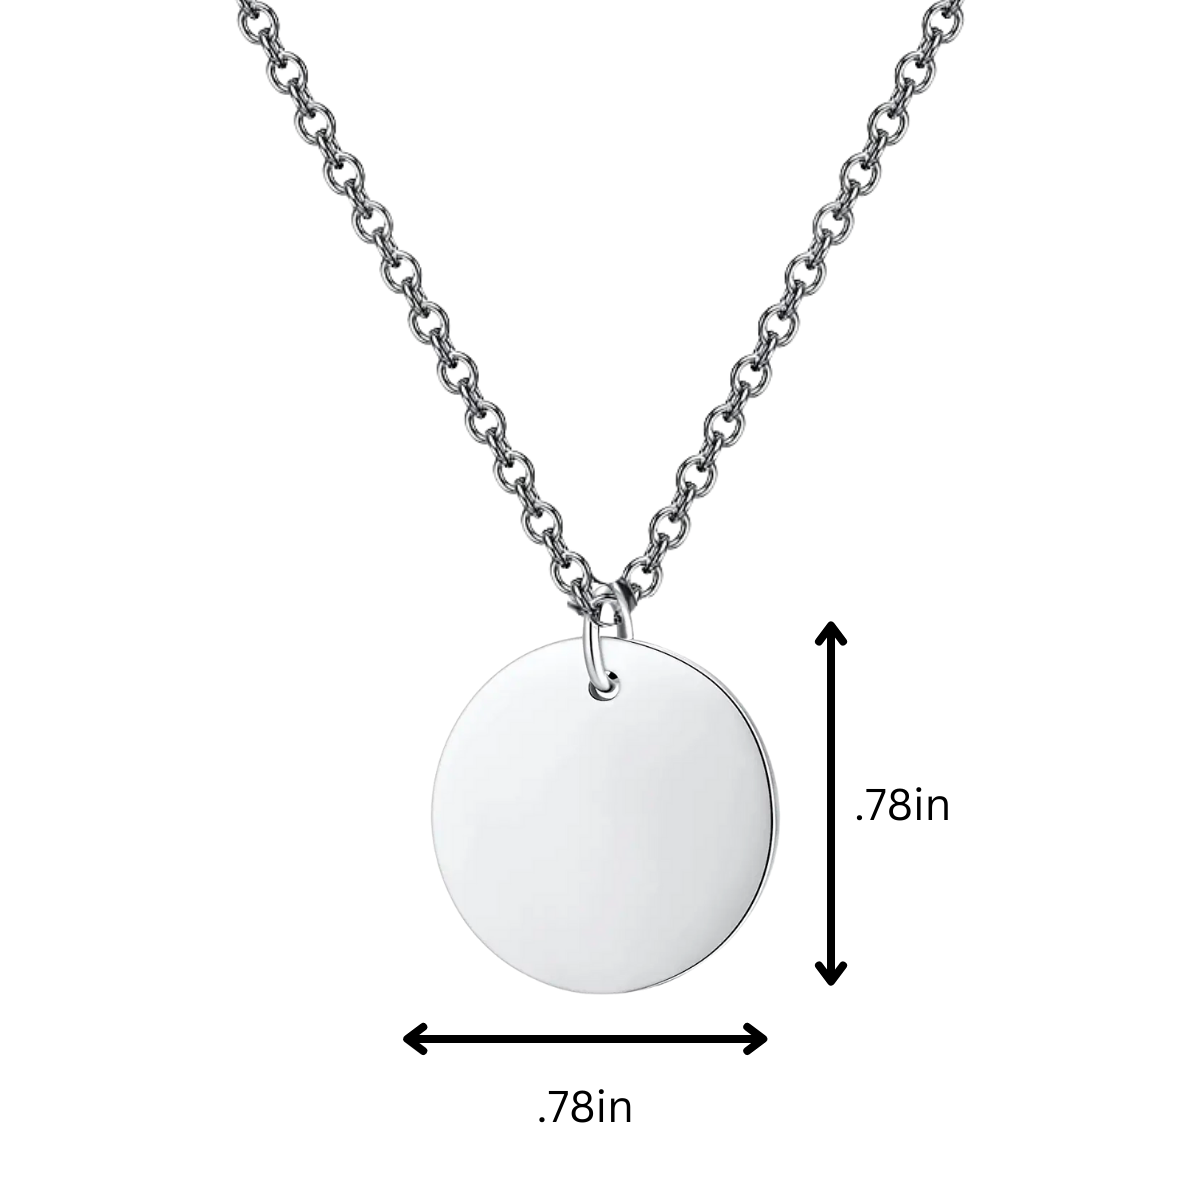 Engraved Soccer Ball Necklace